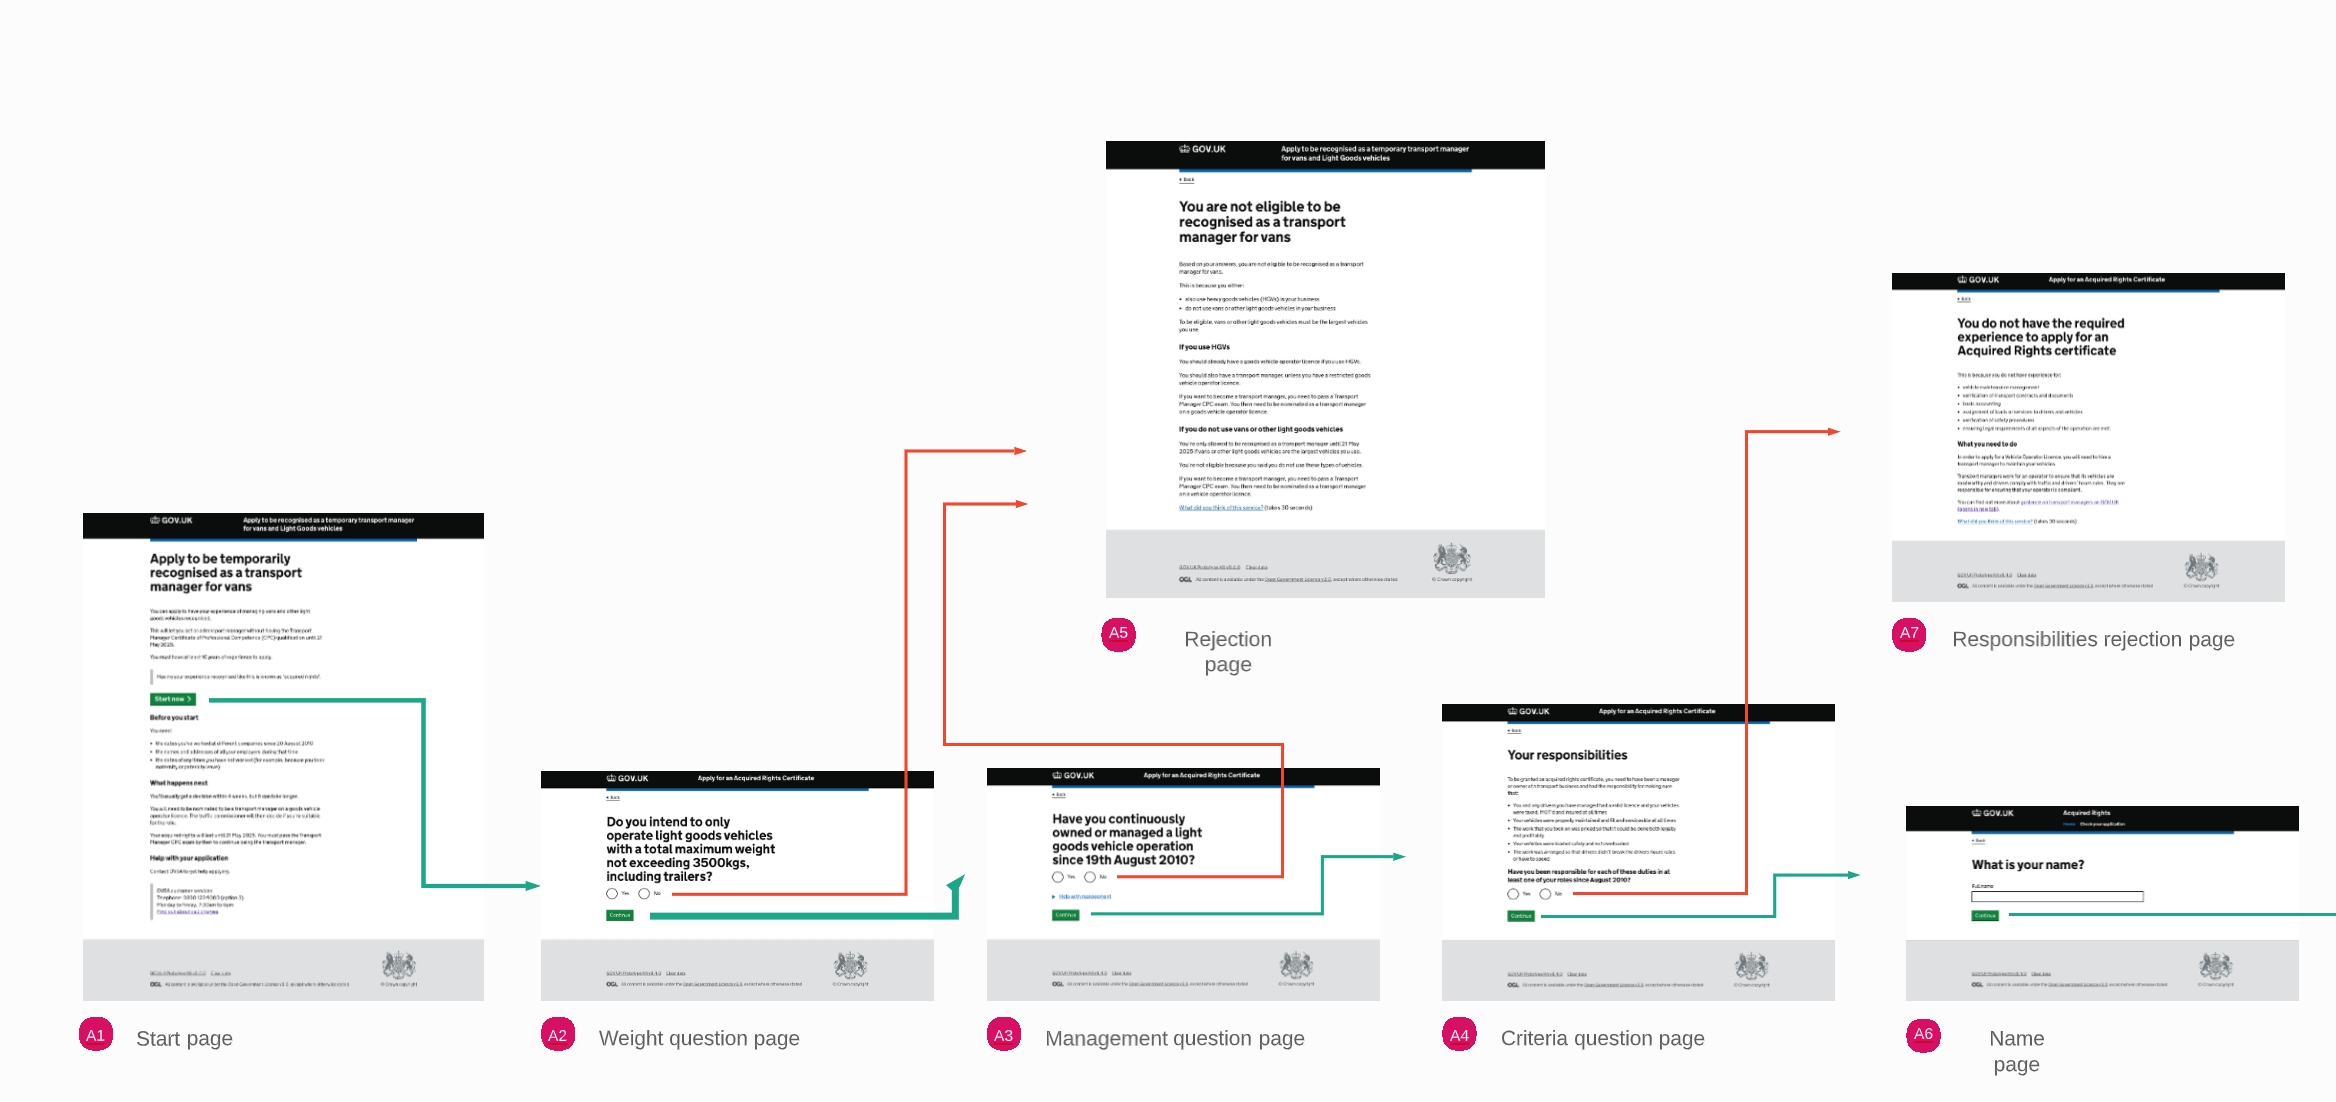 An early screenshot from one of the initial user journey maps